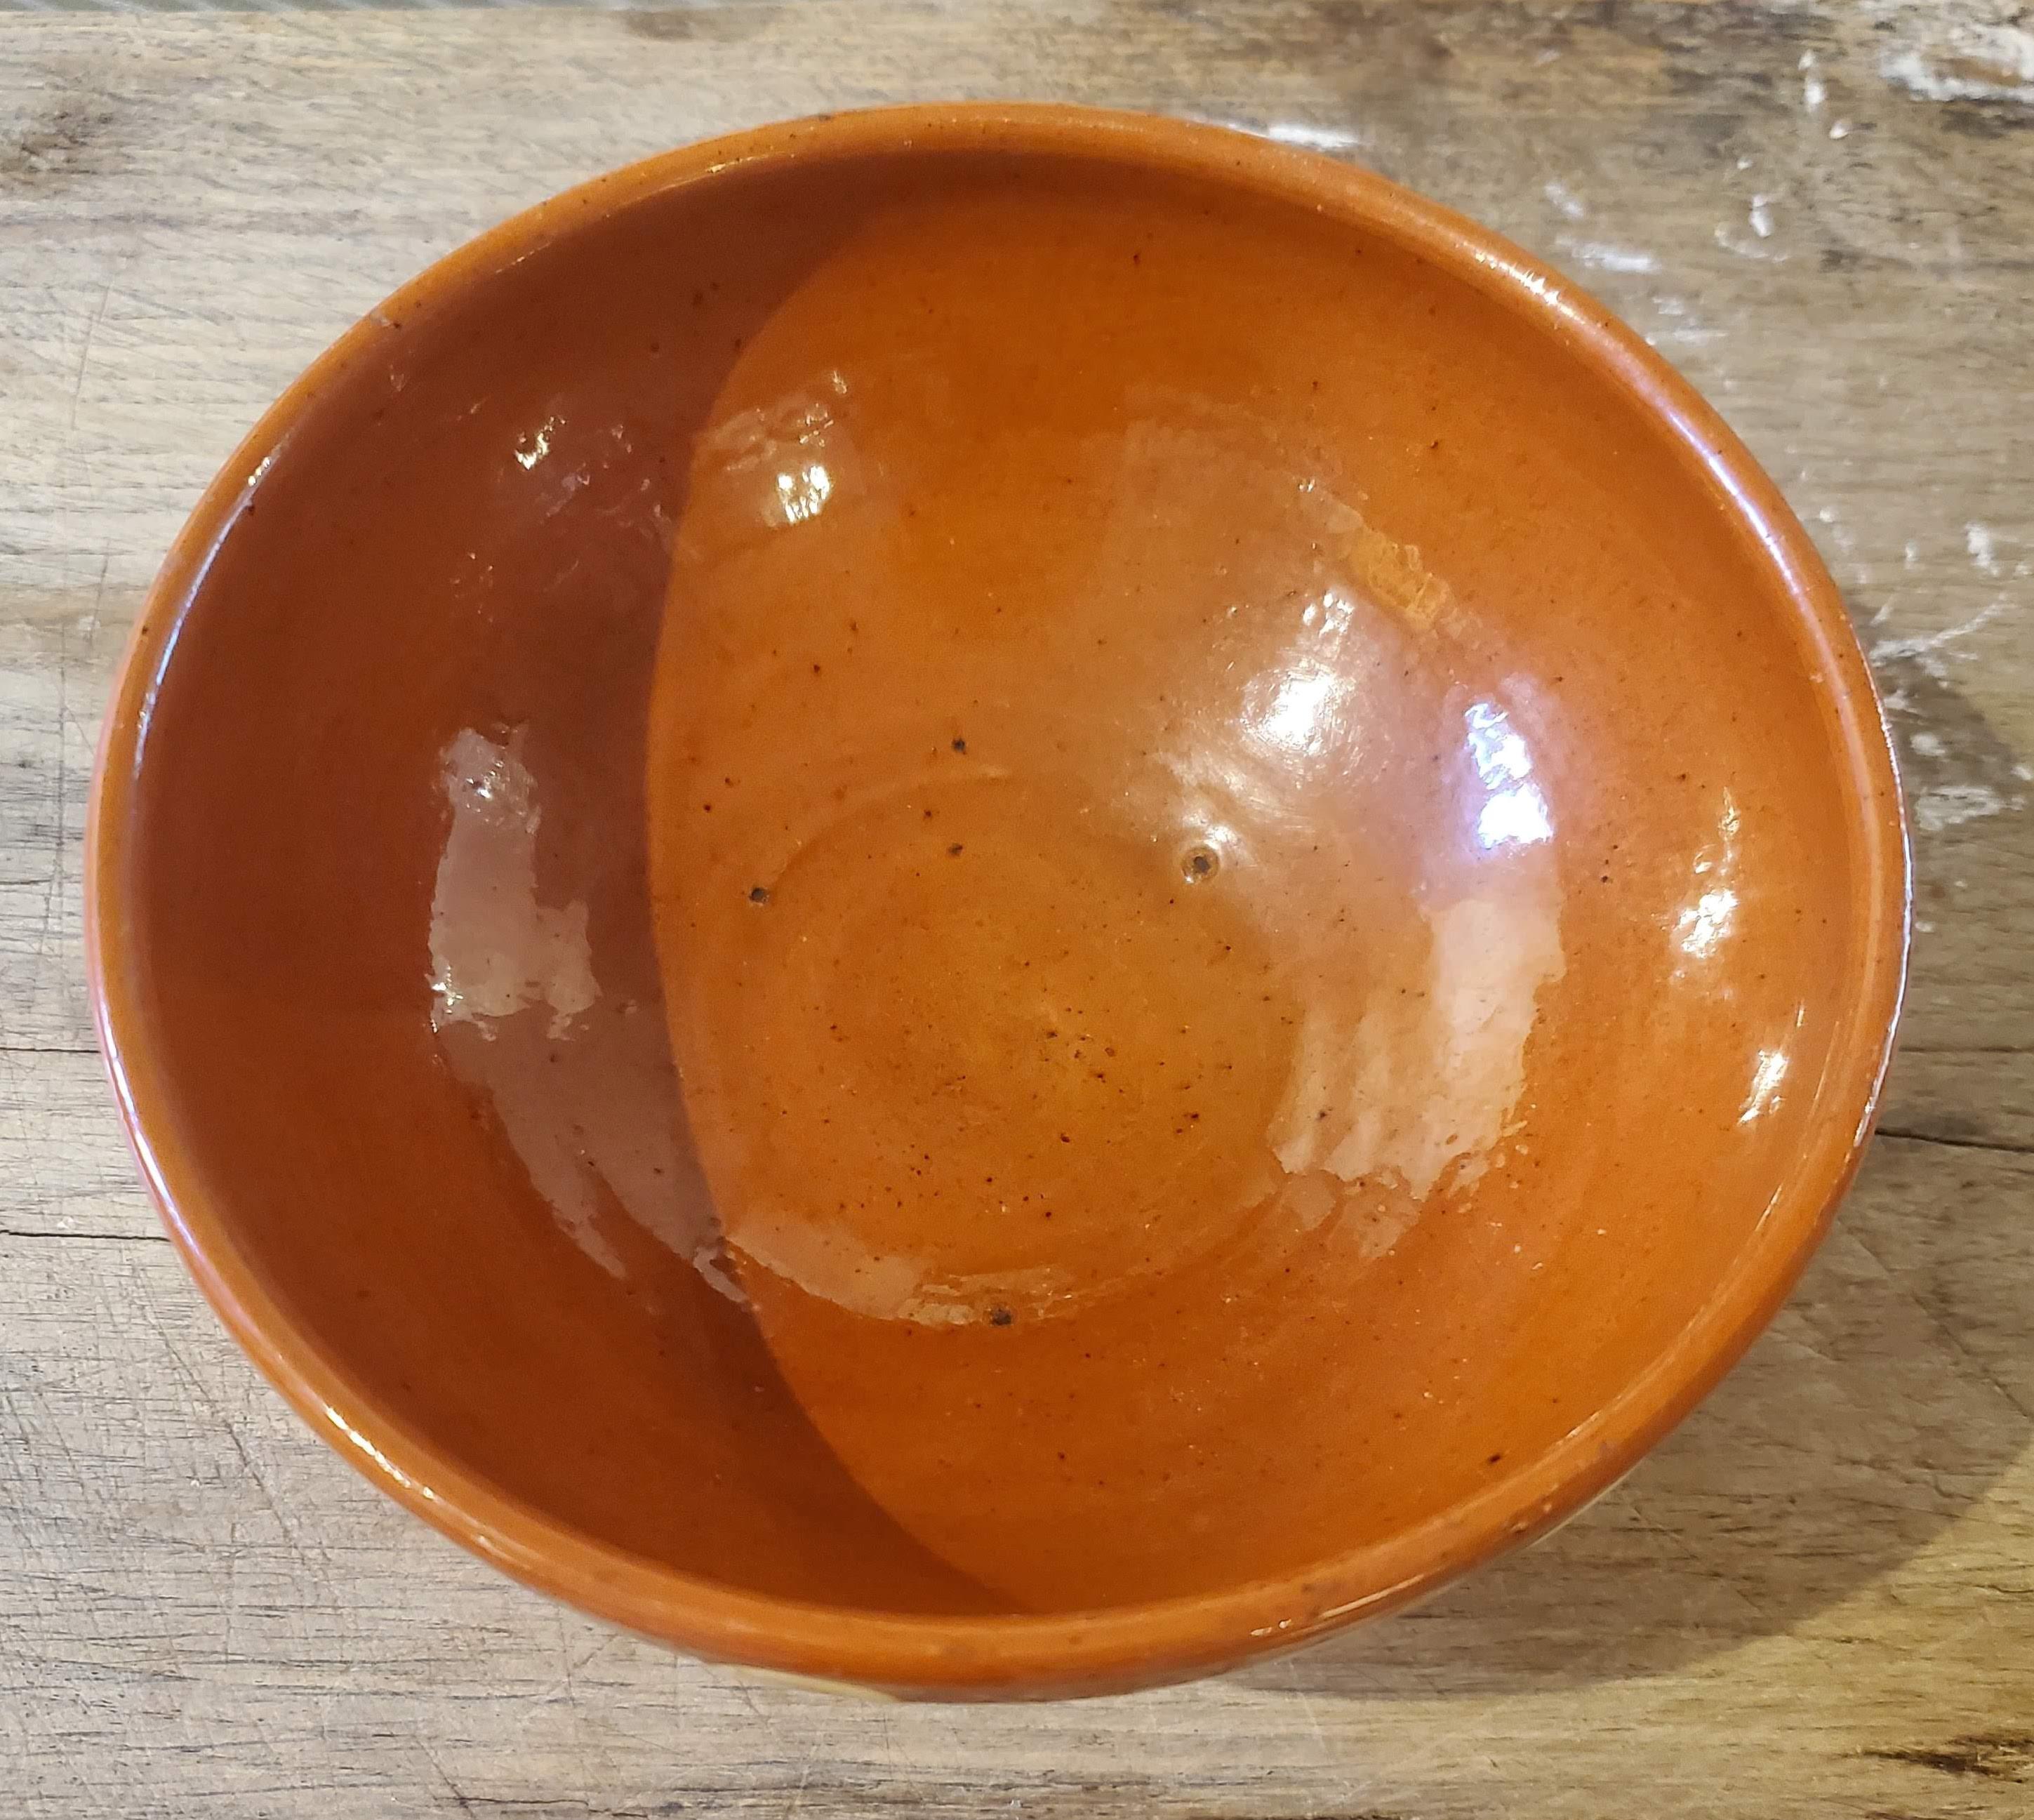 Small French Provincial terracotta bowl with cream polka dot decoration. Sweet little piece for jewelry, keys or whatever small items you need to store. 
Alsace, circa 1870.
Measures: 2.5